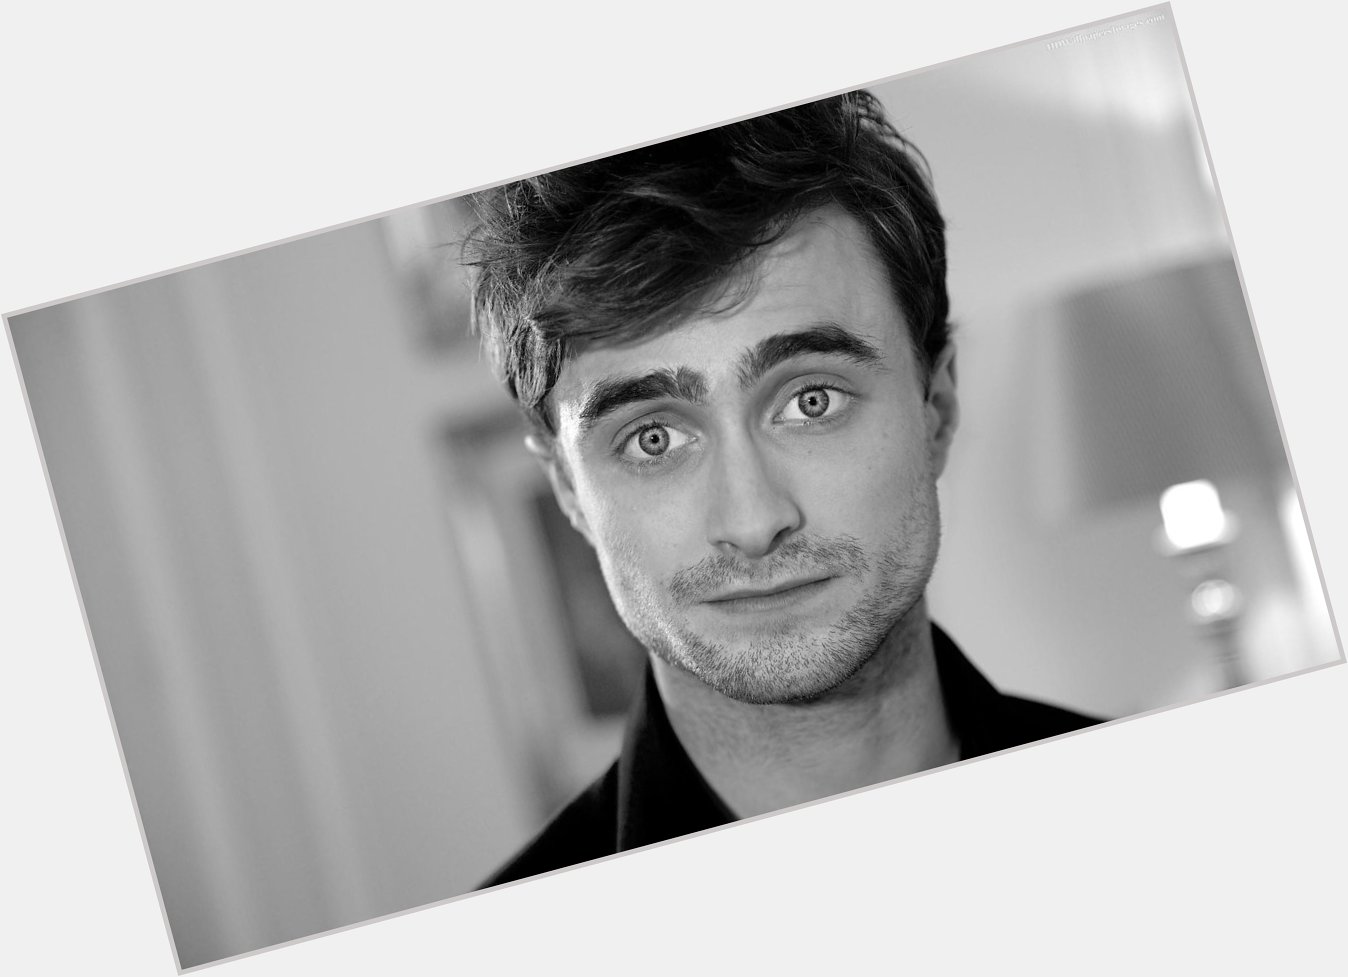 Happy birthday to the boy I\ve been in love with since I was 6: Daniel Radcliffe!!!! Keep being you, babe. 